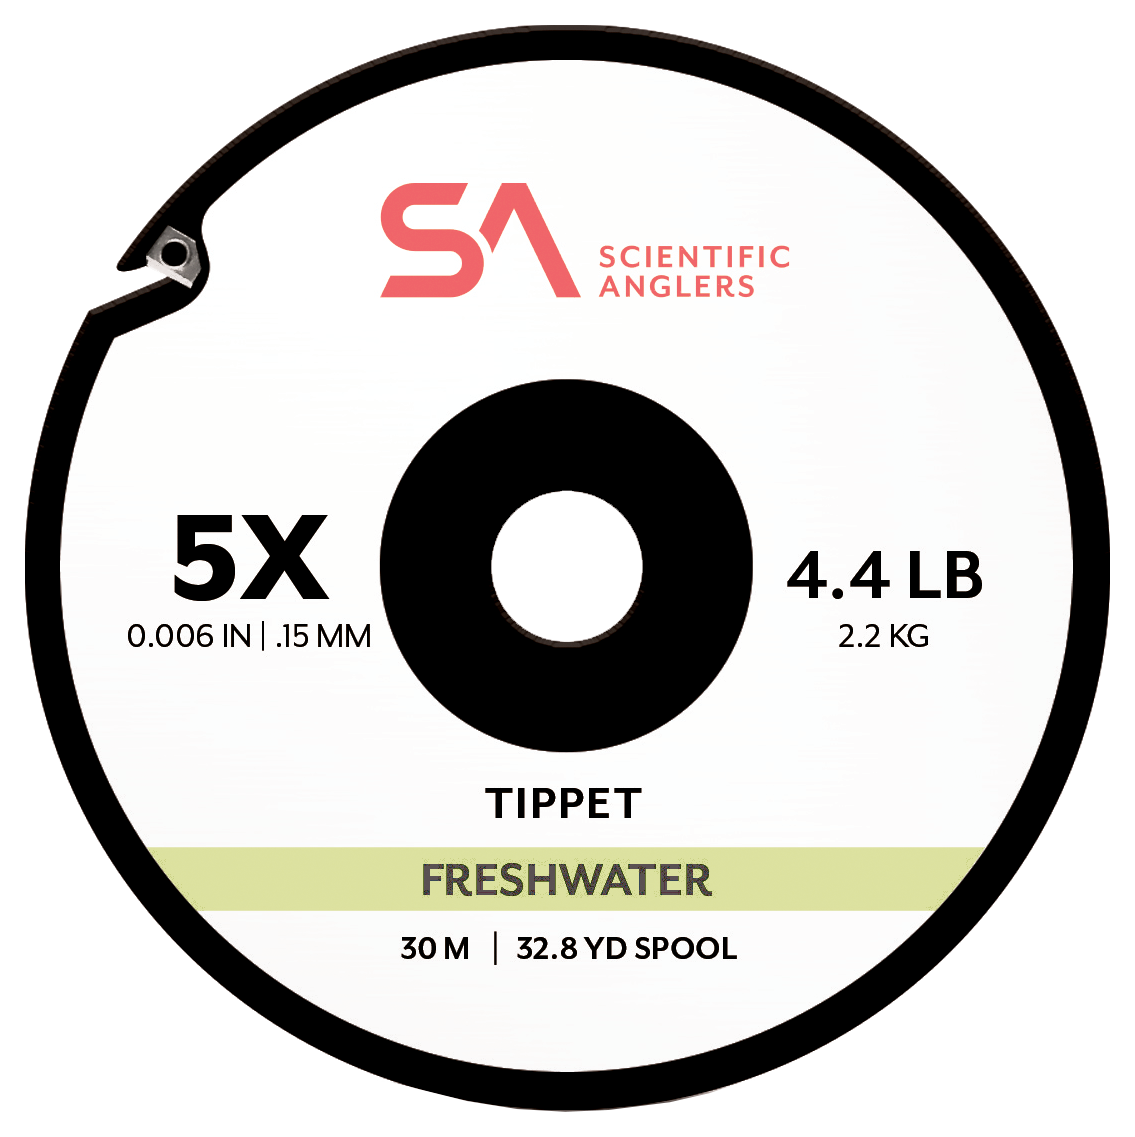 Scientific Angler Freshwater Tippet - 3X